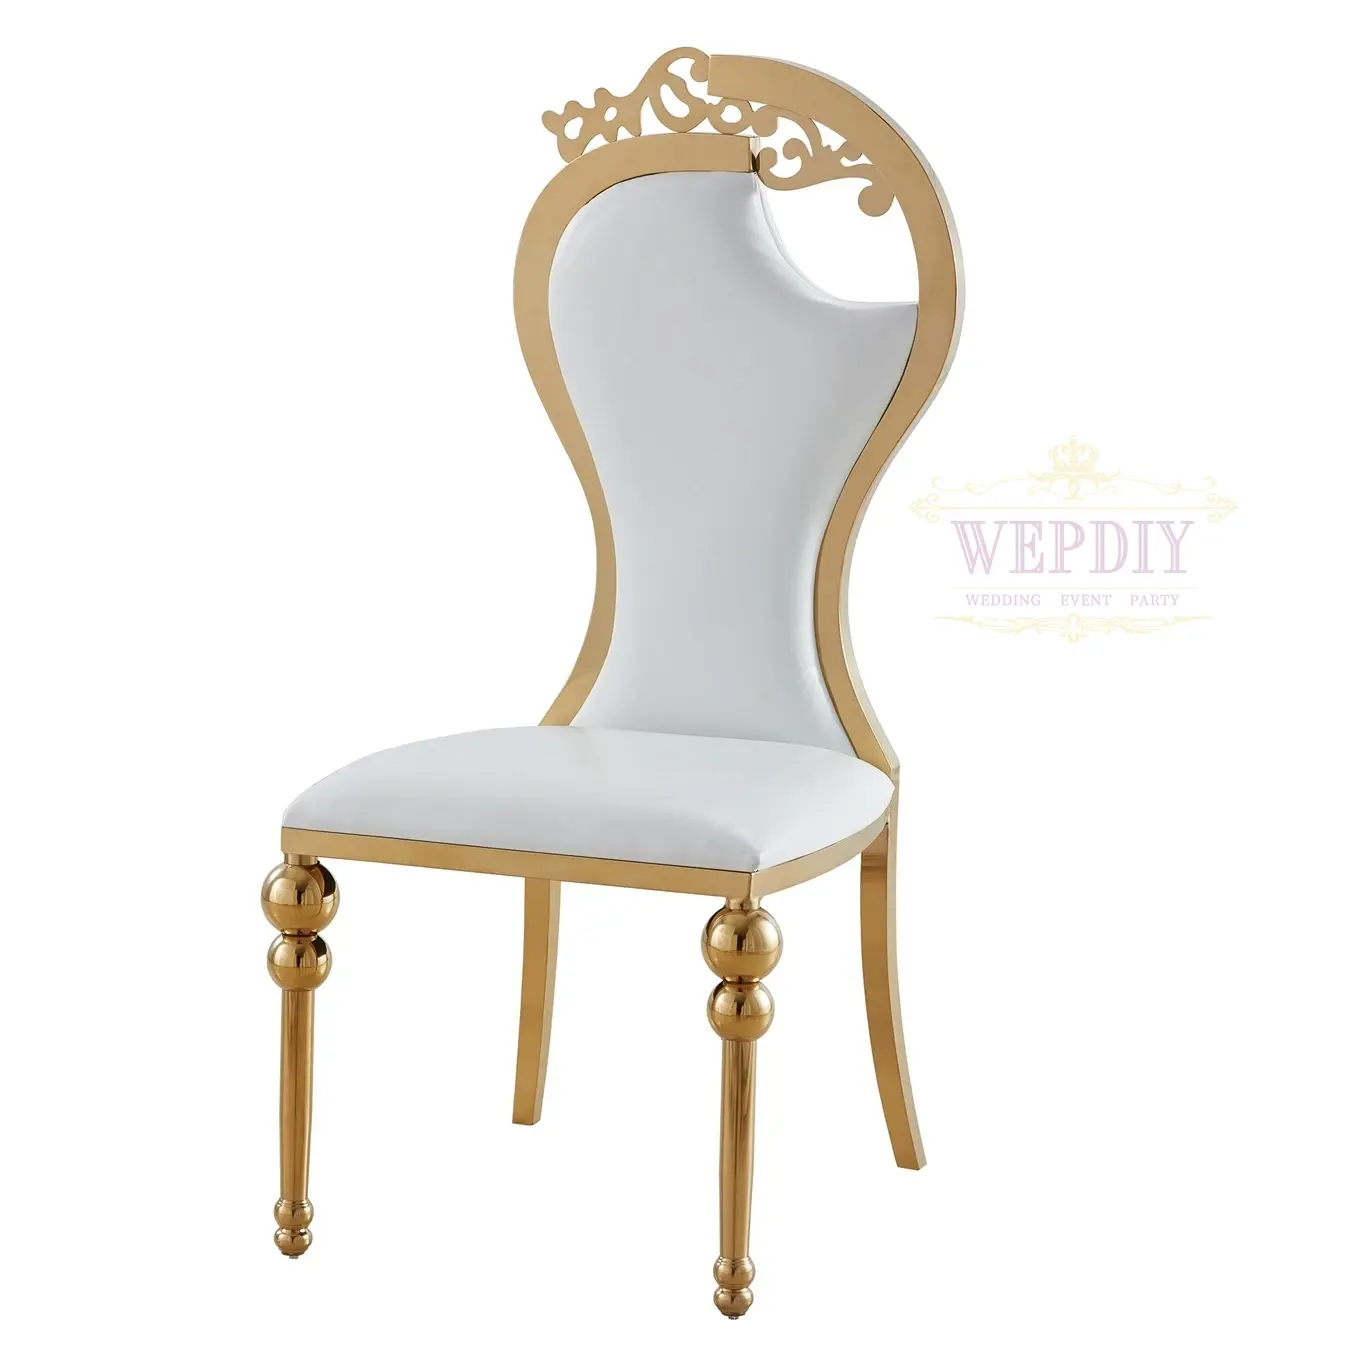 Luxurious Bride And Groom Throne Chairs Wedding Party Tables And Chairs